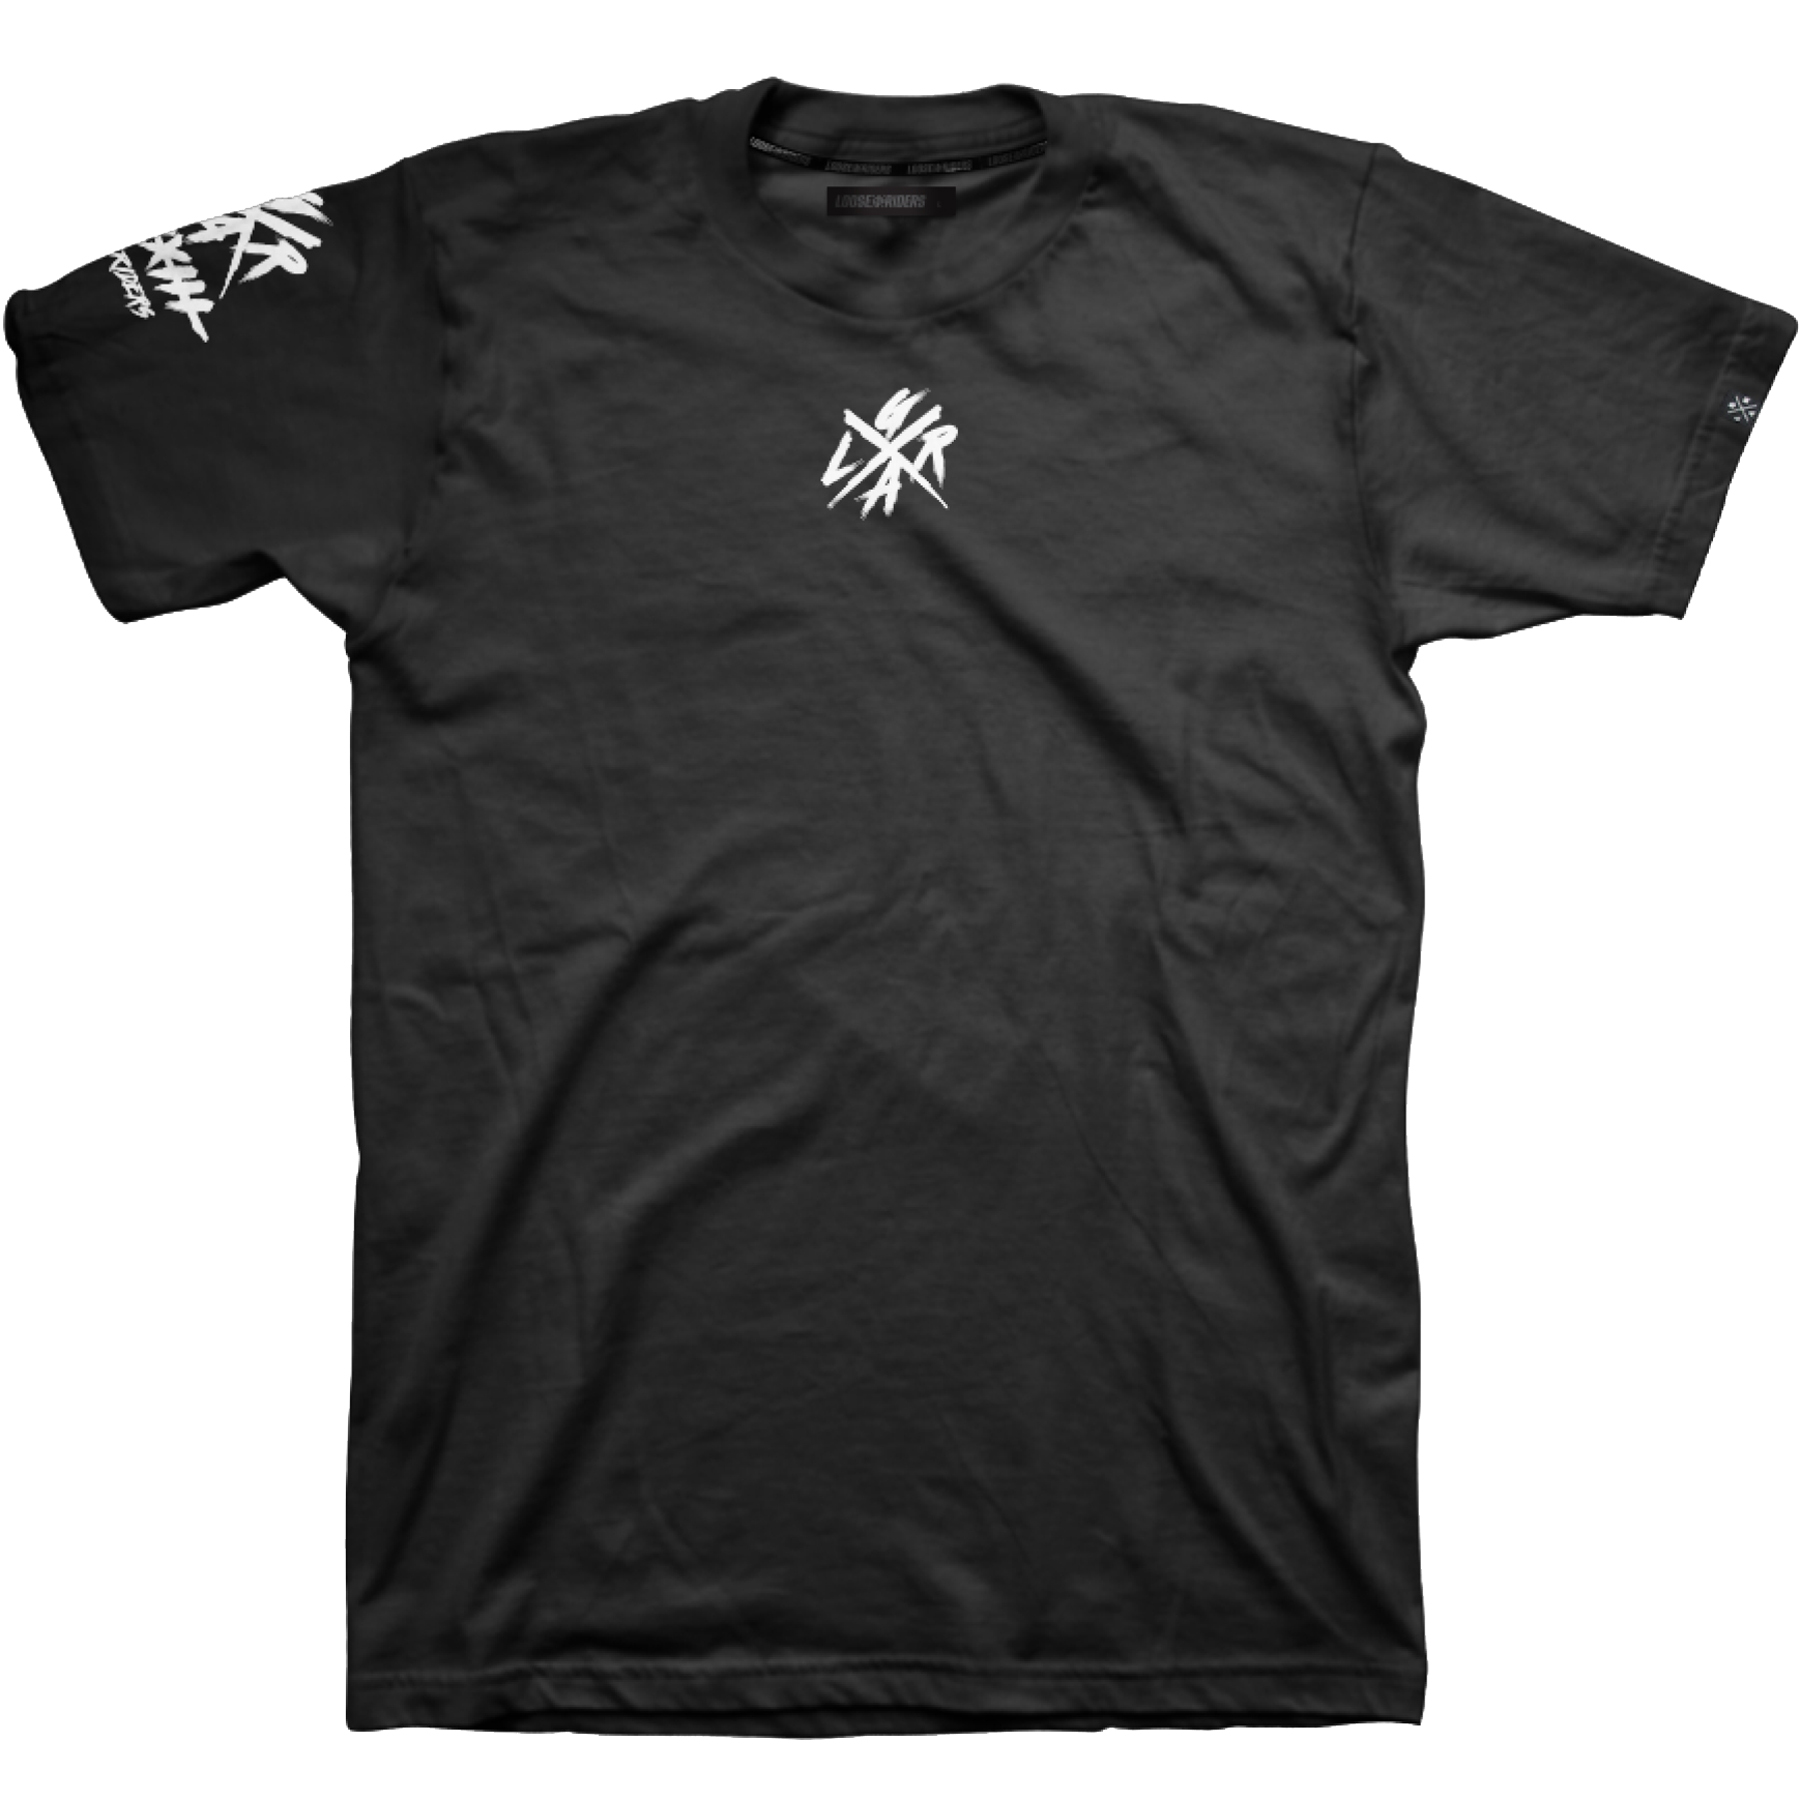 Picture of Loose Riders Lifestyle T-Shirt - The Cult Black